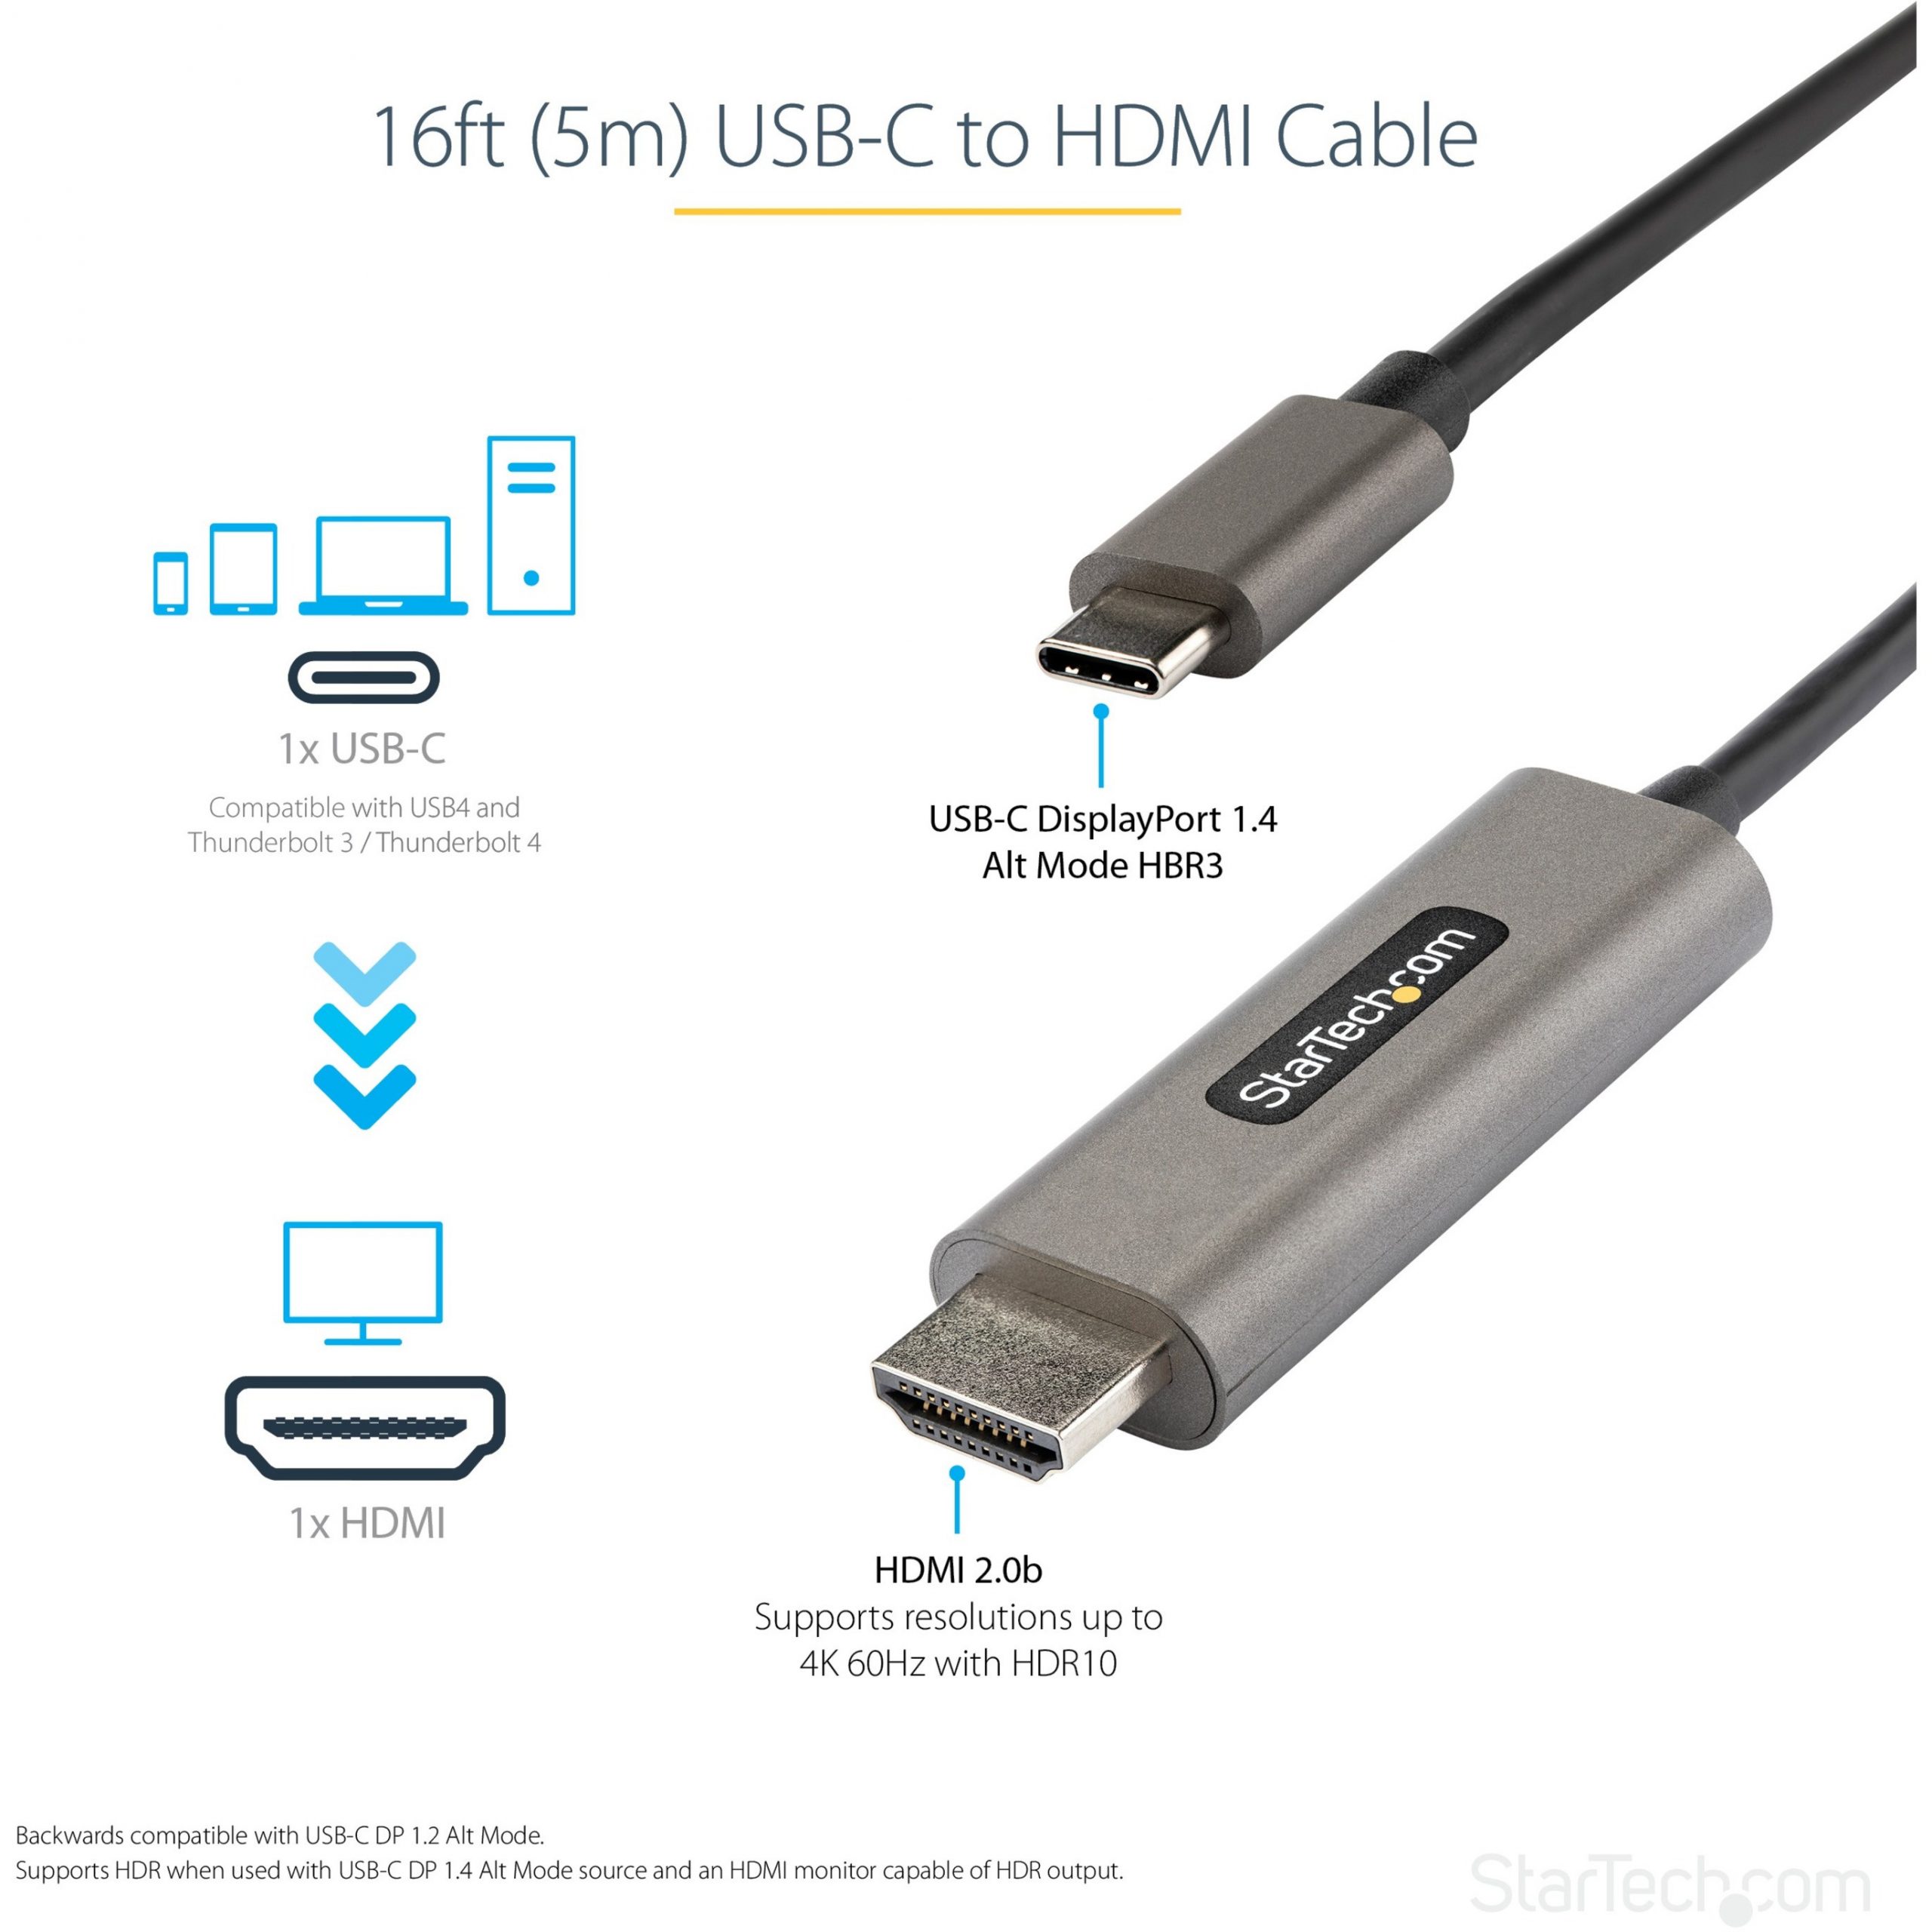 Startech .com 16ft (5m) USB C to HDMI Cable 4K 60Hz with HDR10, Ultra HD  USB Type-C to HDMI 2.0b Video Adapter Cable, DP 1.4 Alt Mode HBR3 -  CDP2HDMM5MH - Corporate Armor